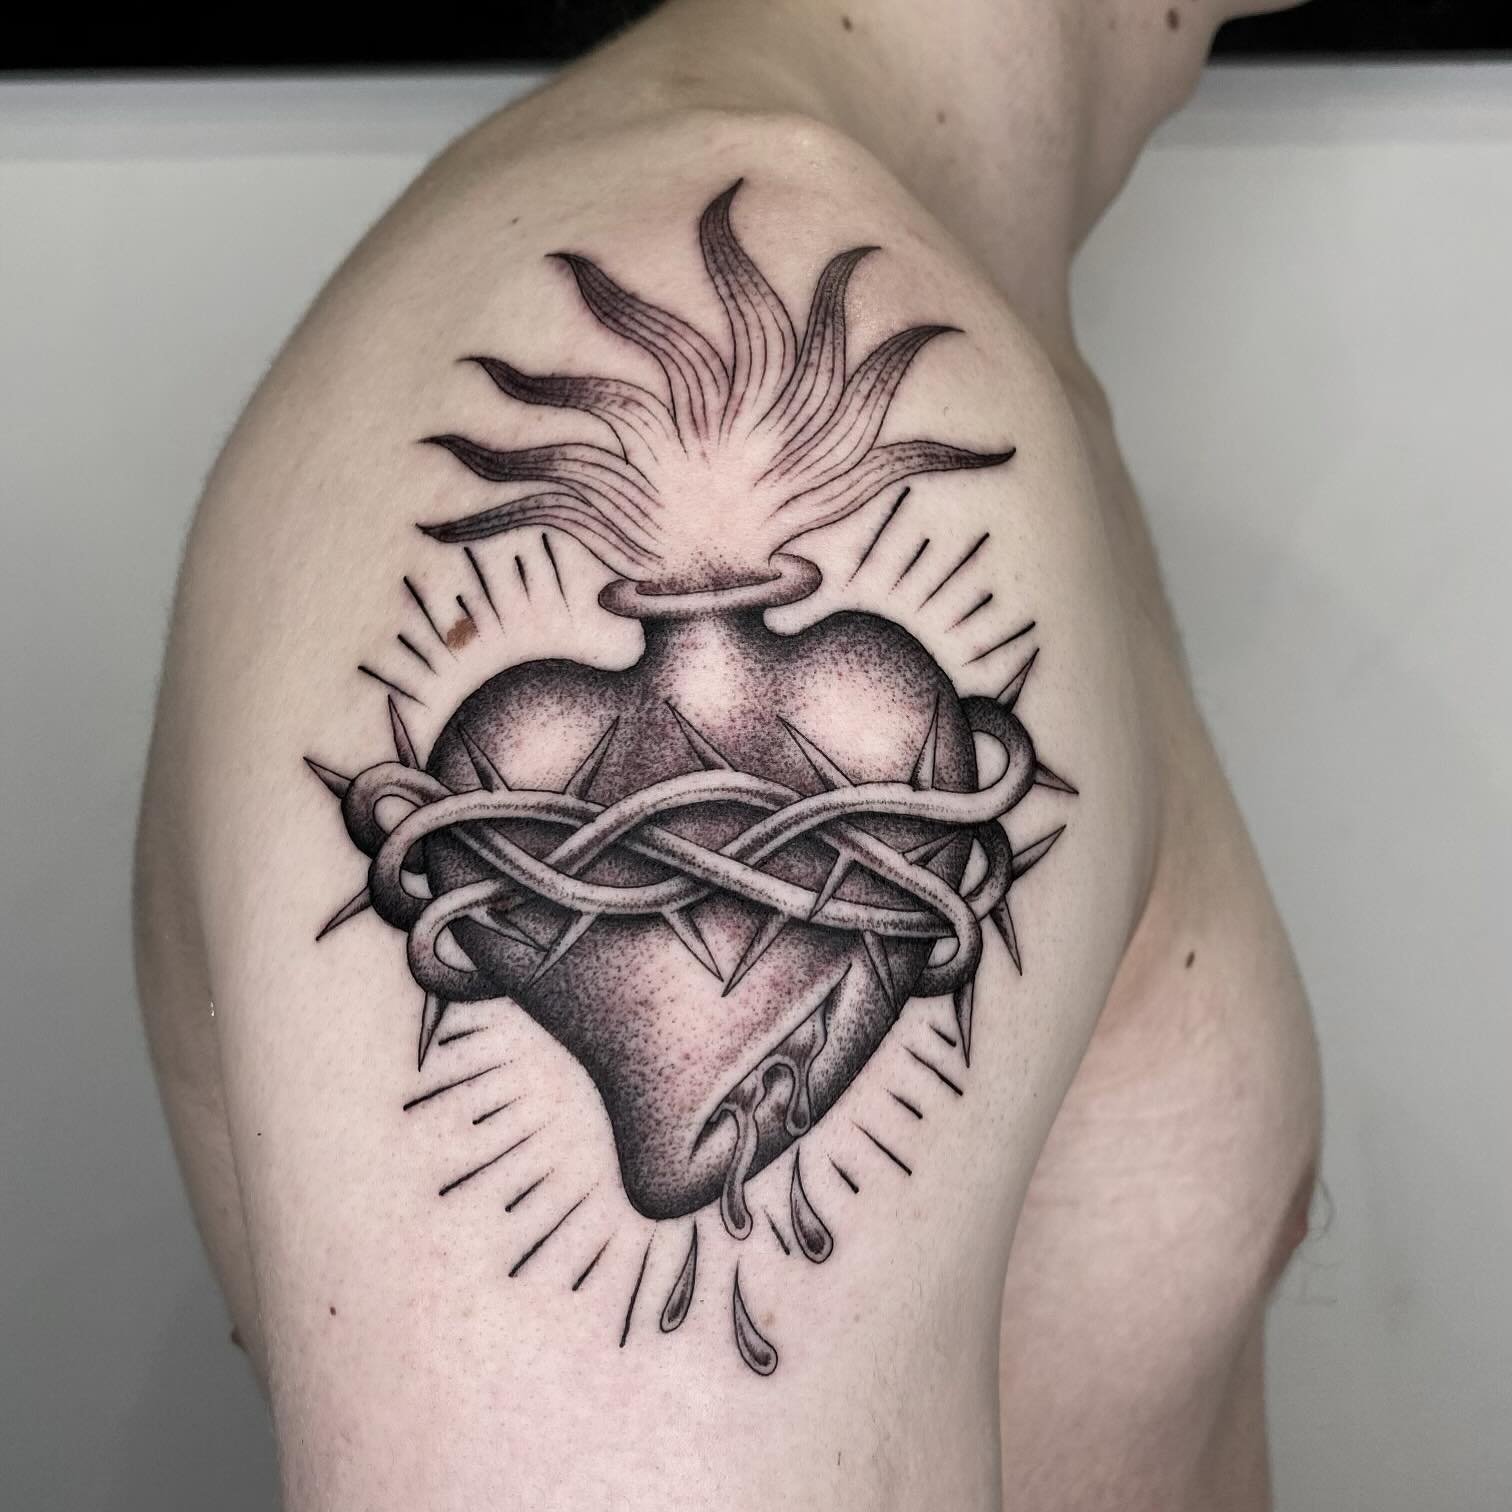 Sacred heart by Karl! @karlwillmann 
We&rsquo;re stoked to have Karl with us on Fridays and Saturdays. Message Karl directly, or send an enquiry via DM or booking form on our website. 
&bull;
&bull;
&bull;
&bull;
&bull;
#new #fyp #tradtattoo #goldcoa